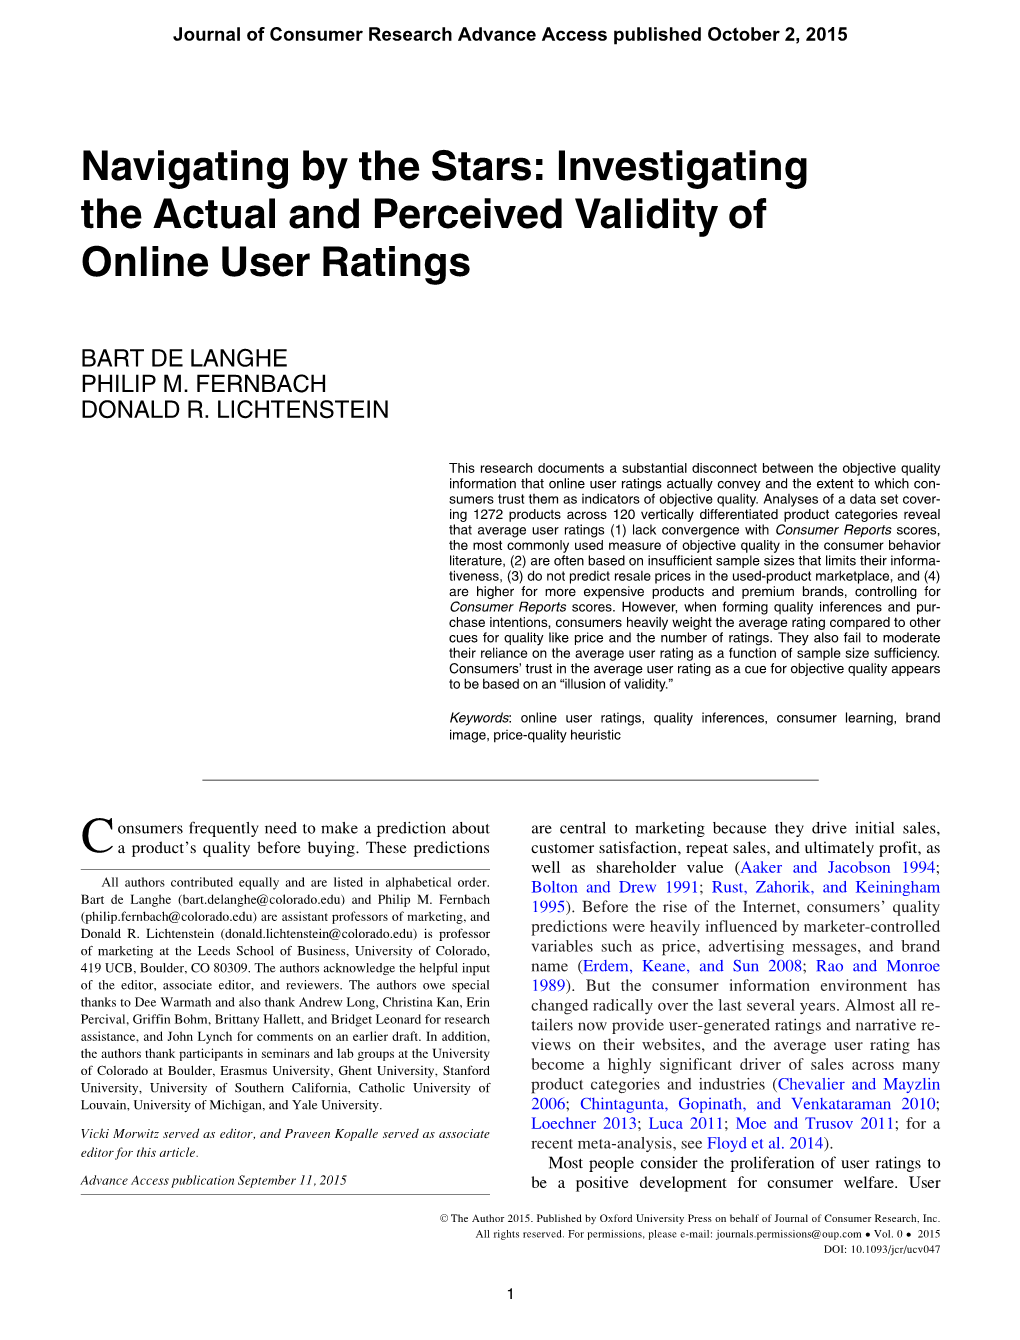 Navigating by the Stars: Investigating the Actual and Perceived Validity of Online User Ratings